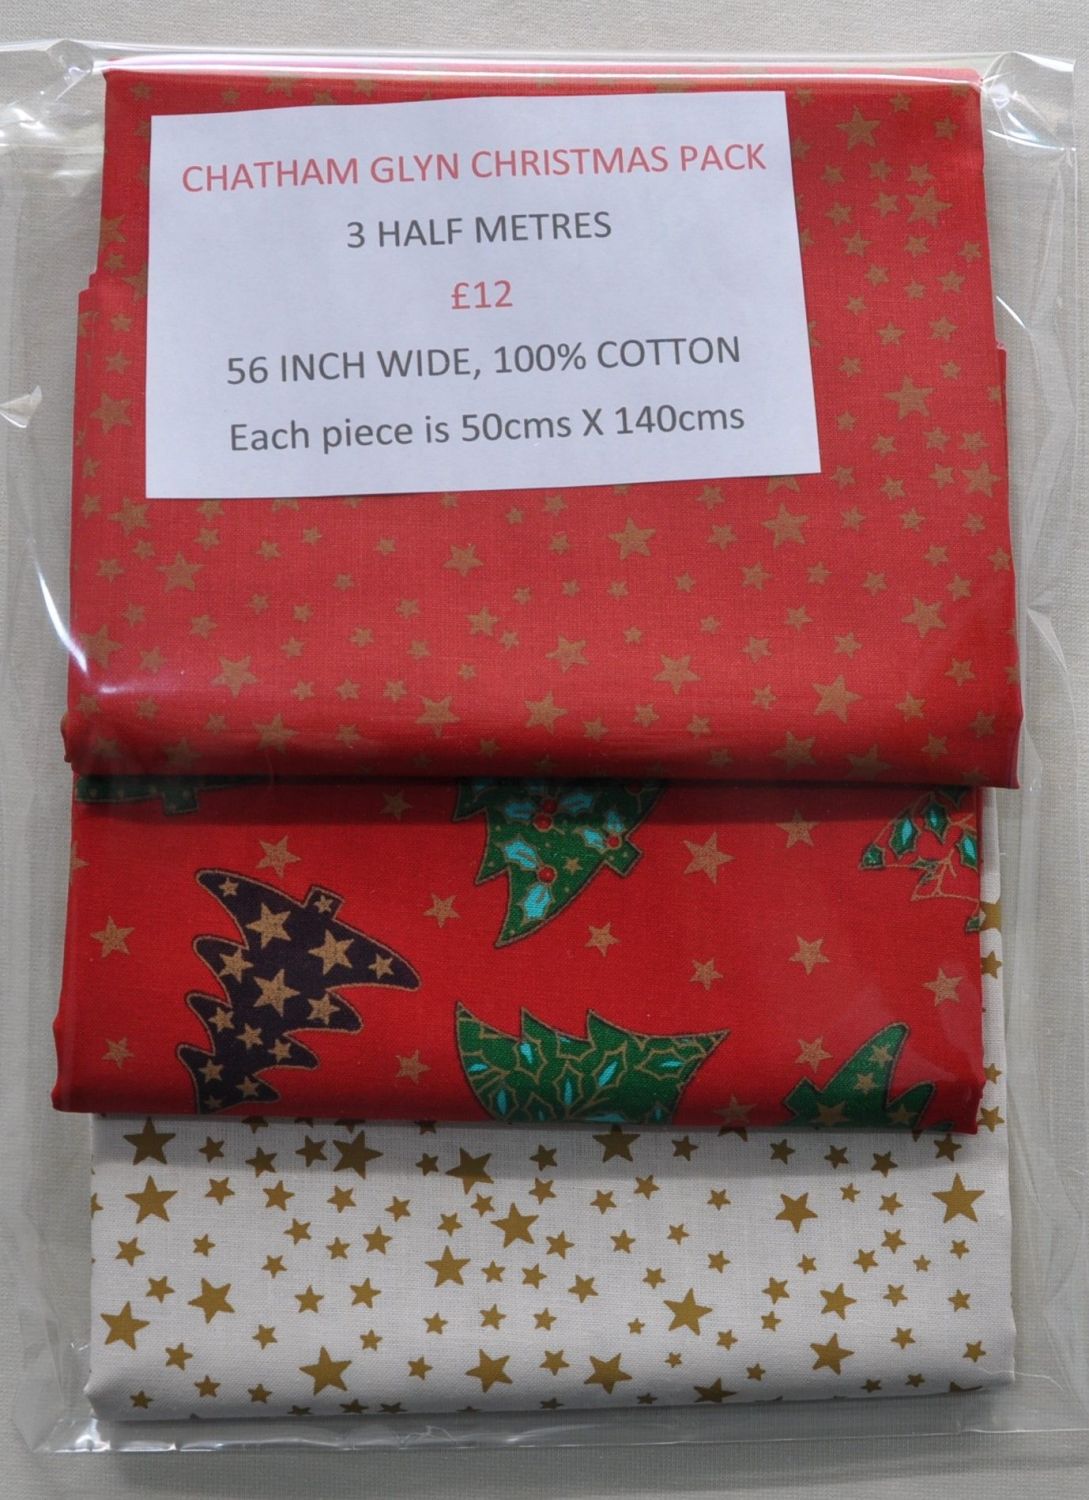 3 half metre pack by Chatham Glyn. 100% cotton. Christmas pack 1.